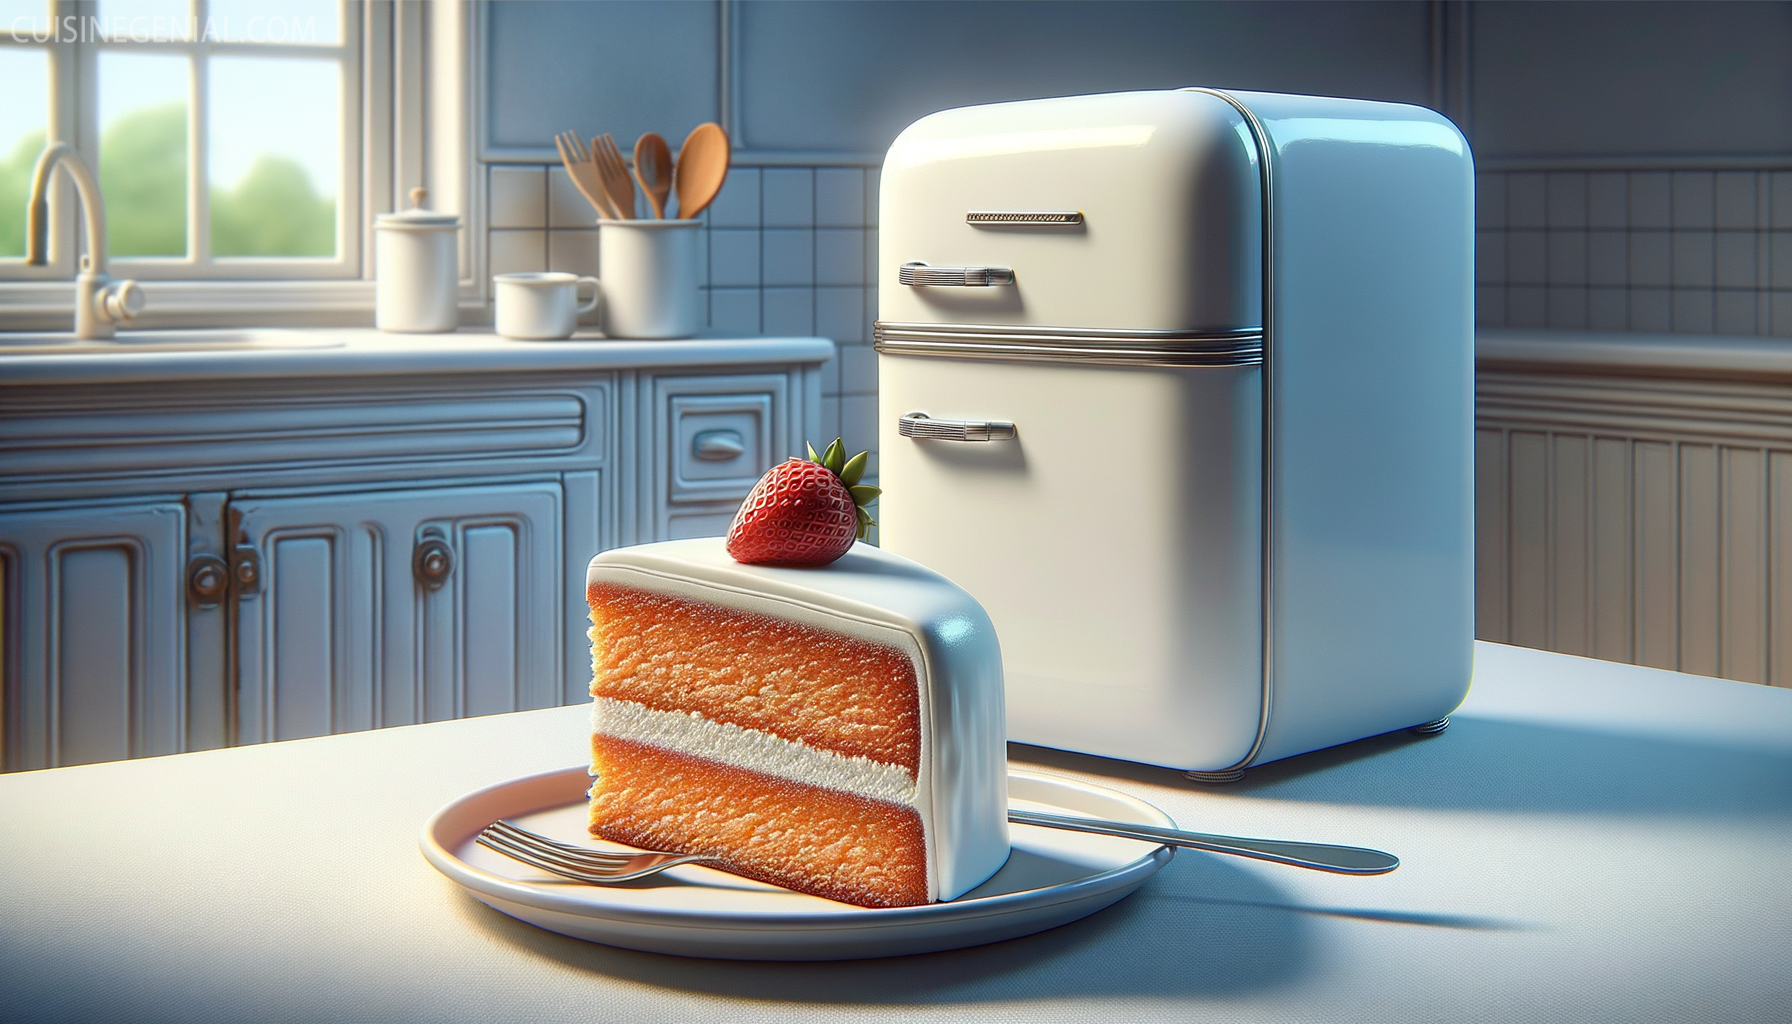 A slice of cake on a plate next to an open fridge, highlighting freshness and proper storage.